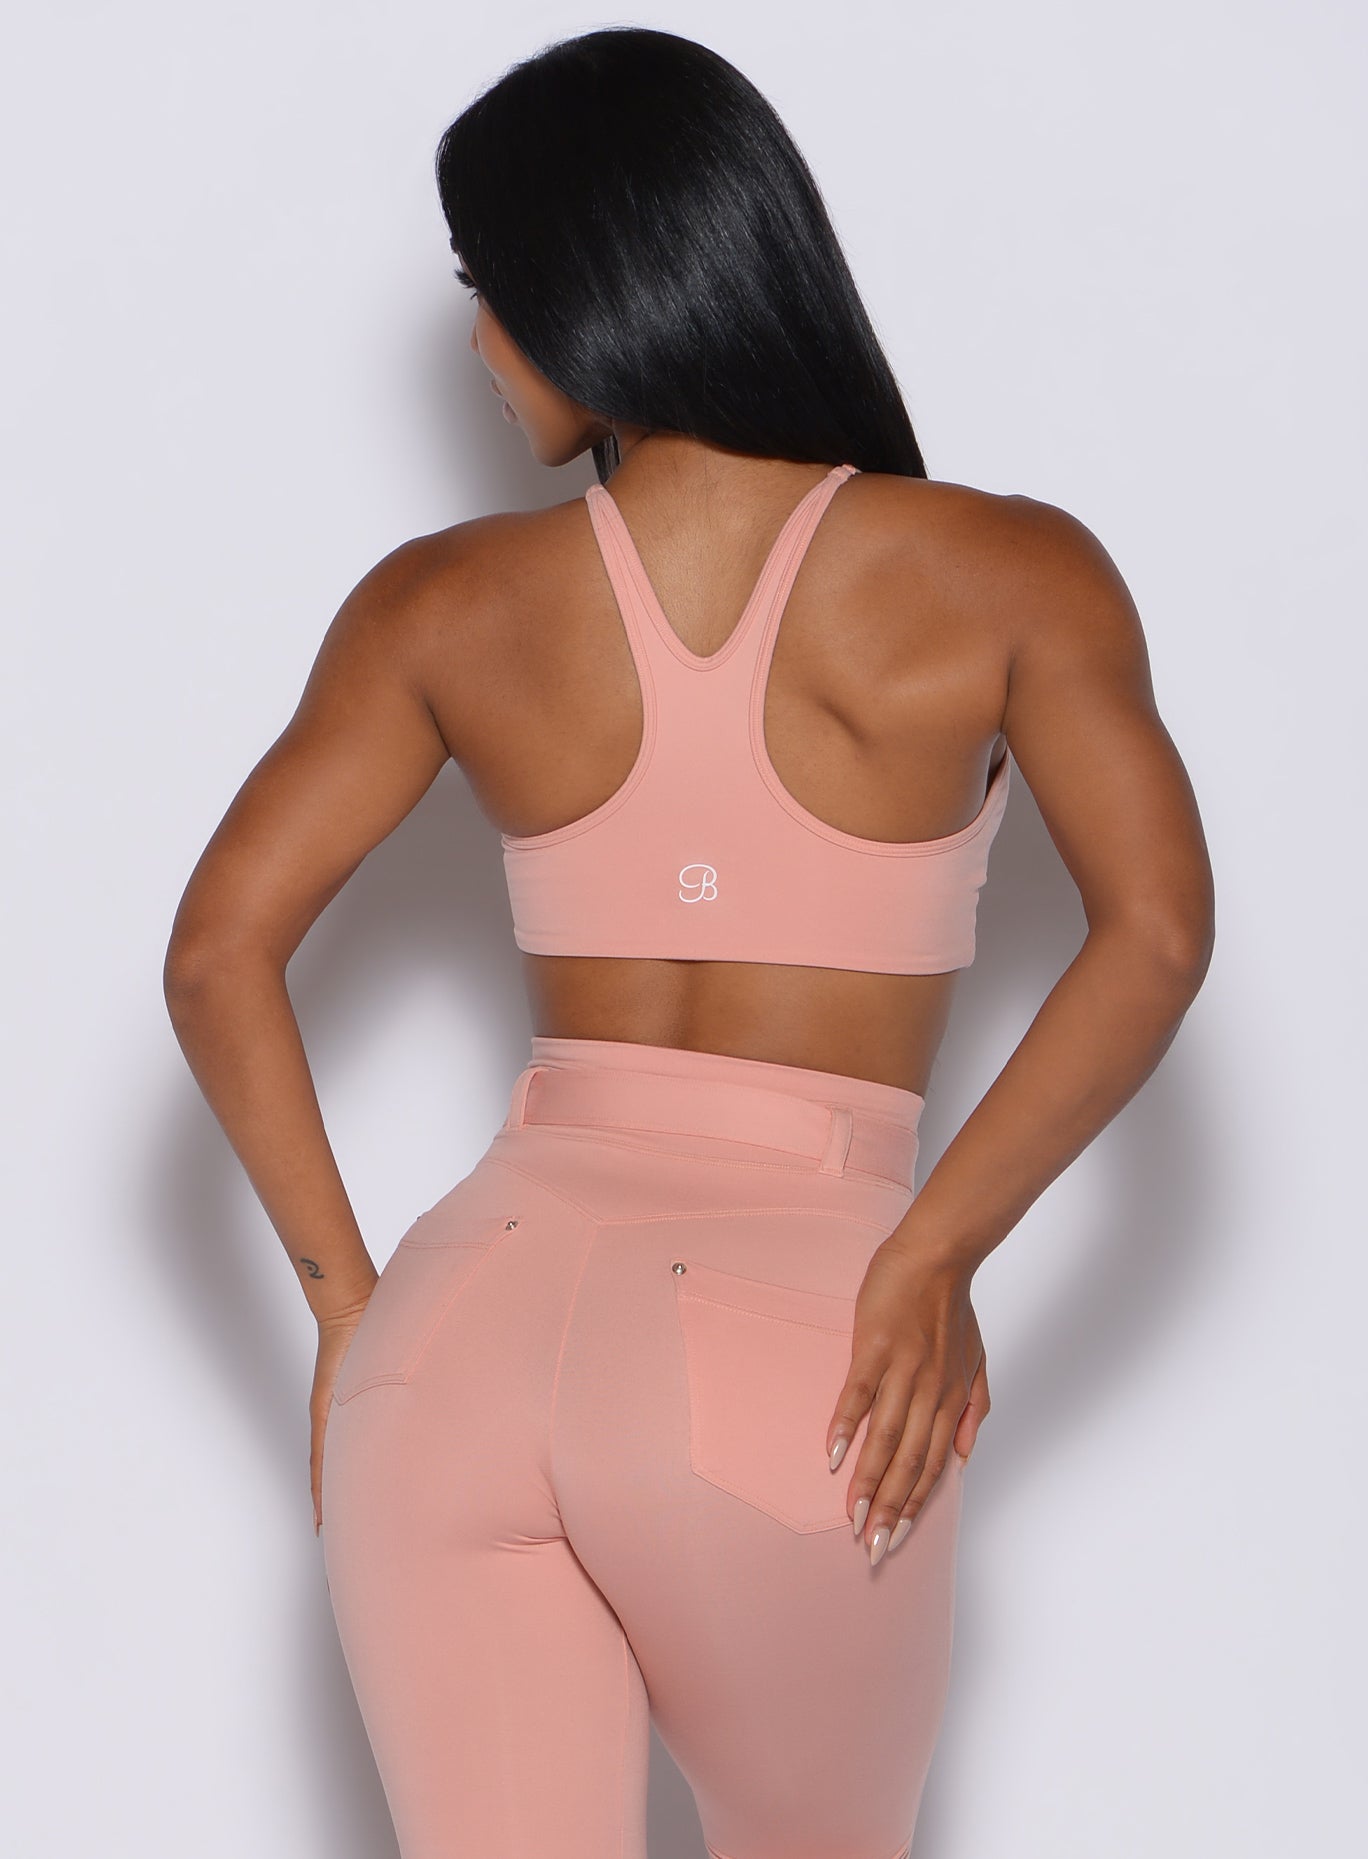 Back profile view of a model wearing our high neck crop bra in pale blush color along with a matching leggings